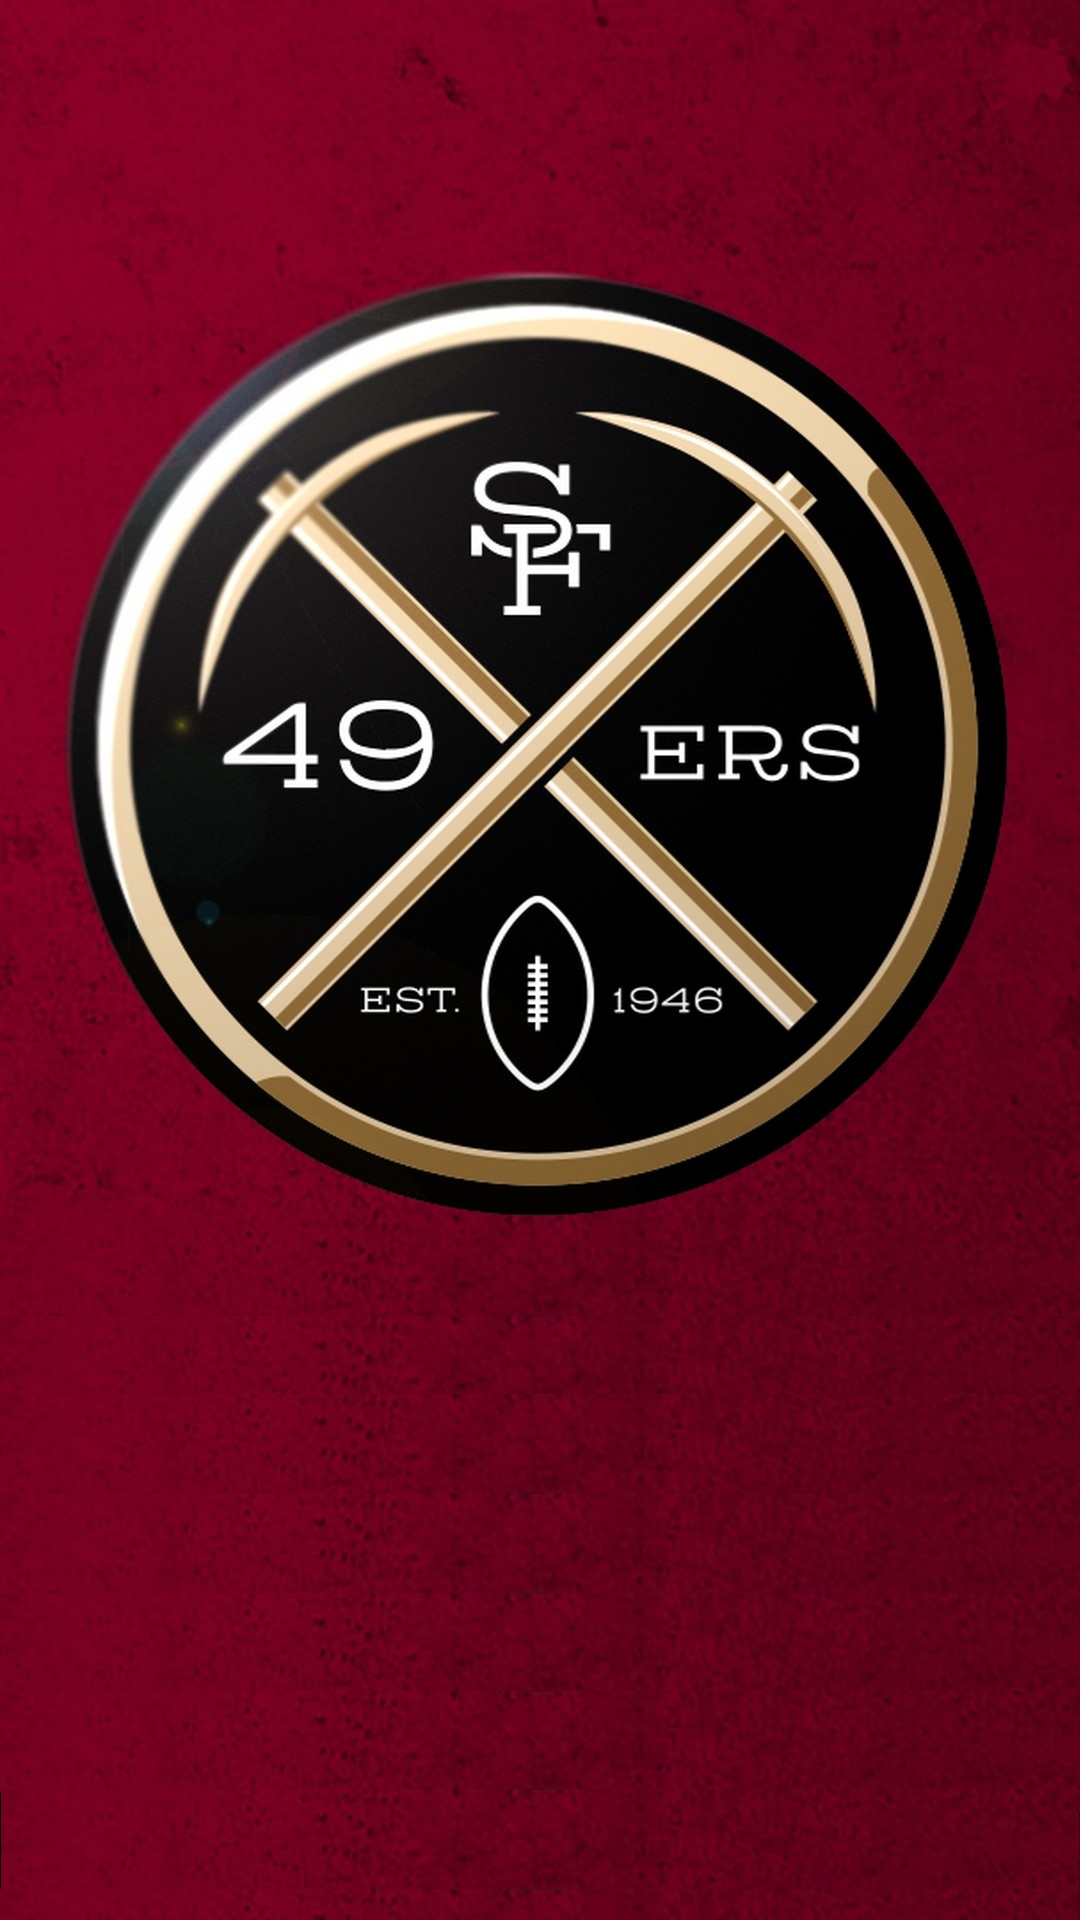 49ers iPhone Lock Screen Wallpaper With high-resolution 1080X1920 pixel. Donwload and set as wallpaper for your iPhone X, iPhone XS home screen backgrounds, XS Max, XR, iPhone8 lock screen wallpaper, iPhone 7, 6, SE, and other mobile devices